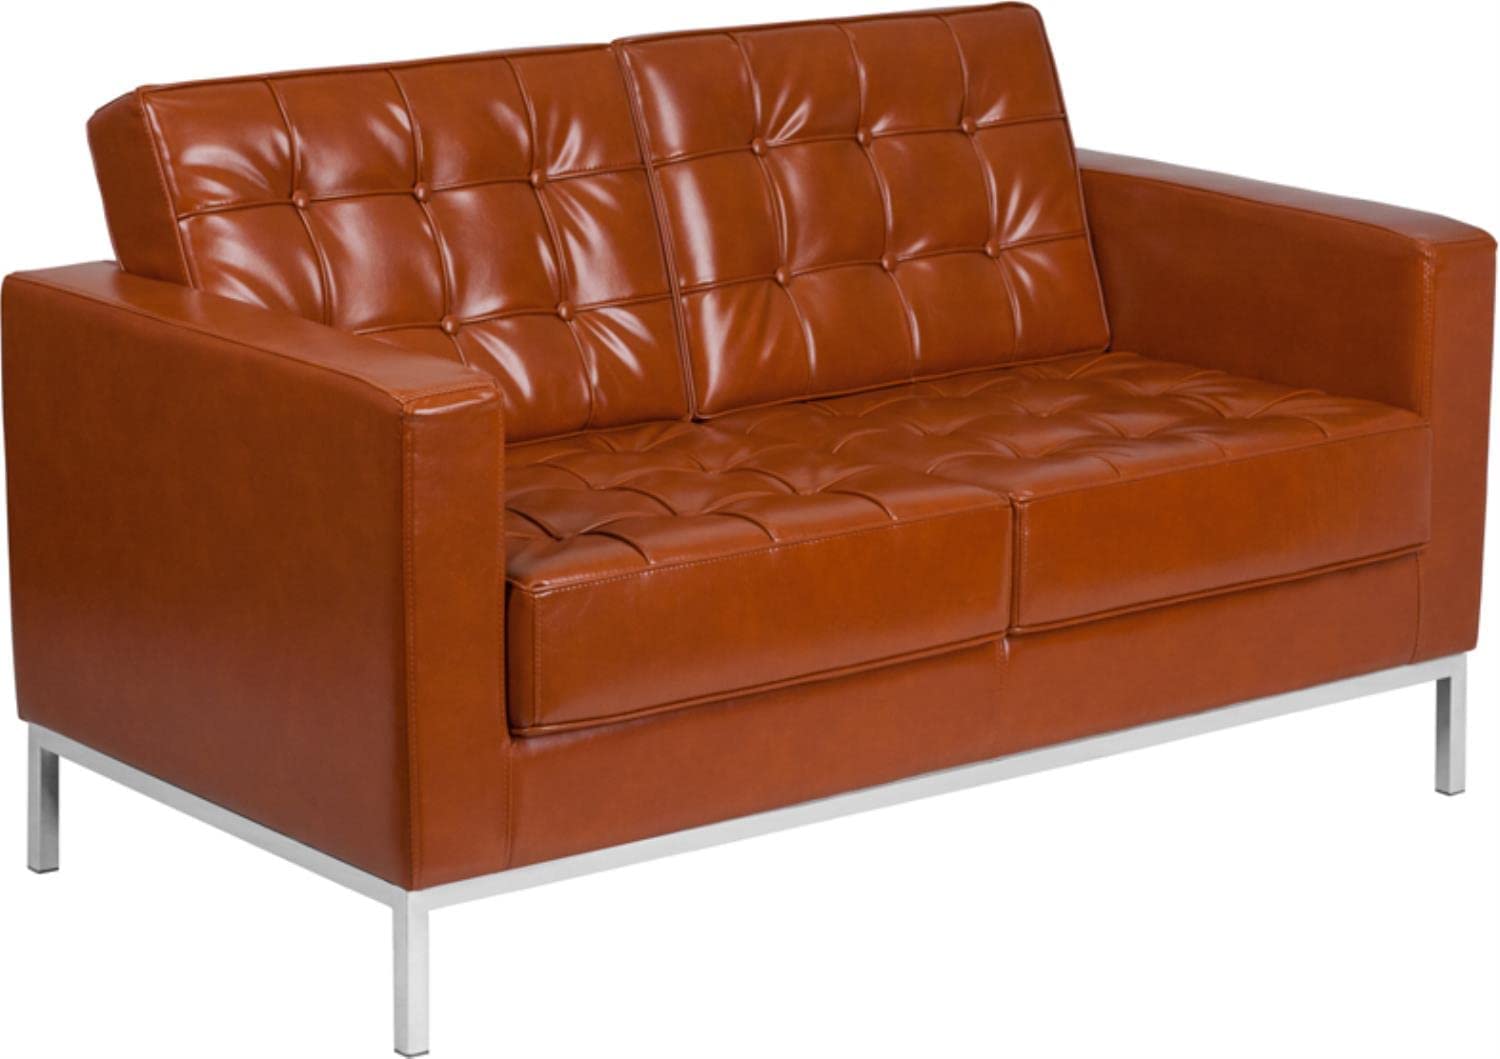 Flash Furniture HERCULES Lacey Series Contemporary Cognac LeatherSoft Loveseat with Stainless Steel Frame